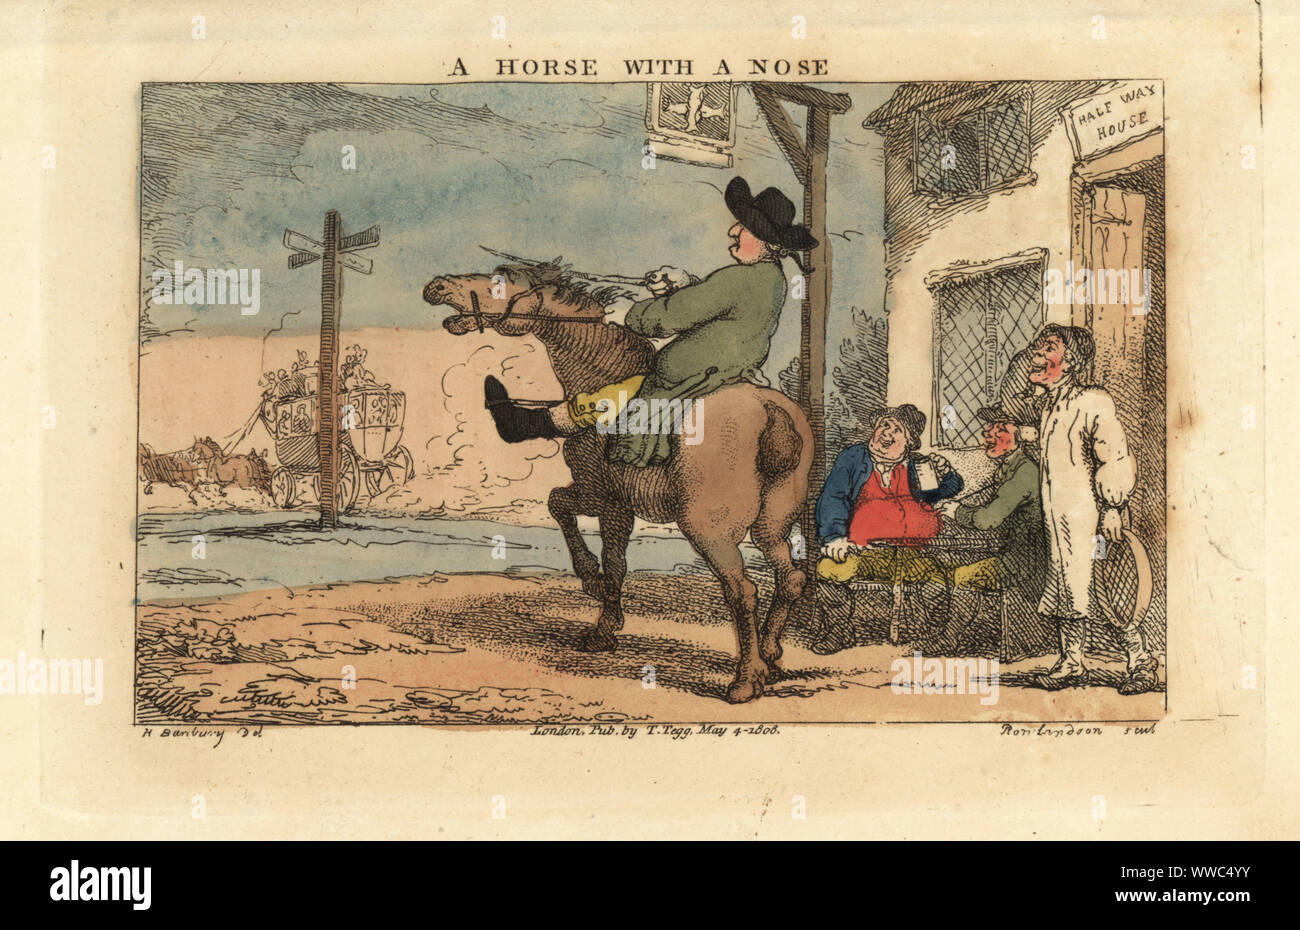 Regency man trying to stop a horse entering a tavern. Drinkers laugh at his struggles to control his horse, as a stage coach rides off in the distance. A Horse with a Nose. Handcoloured copperplate engraving by Thomas Rowlandson after an illustration by Henry Bunbury from Geoffrey Gambado’s An Academy for Grown Horsemen and Annals of Horsemanship, London, 1809. Stock Photo